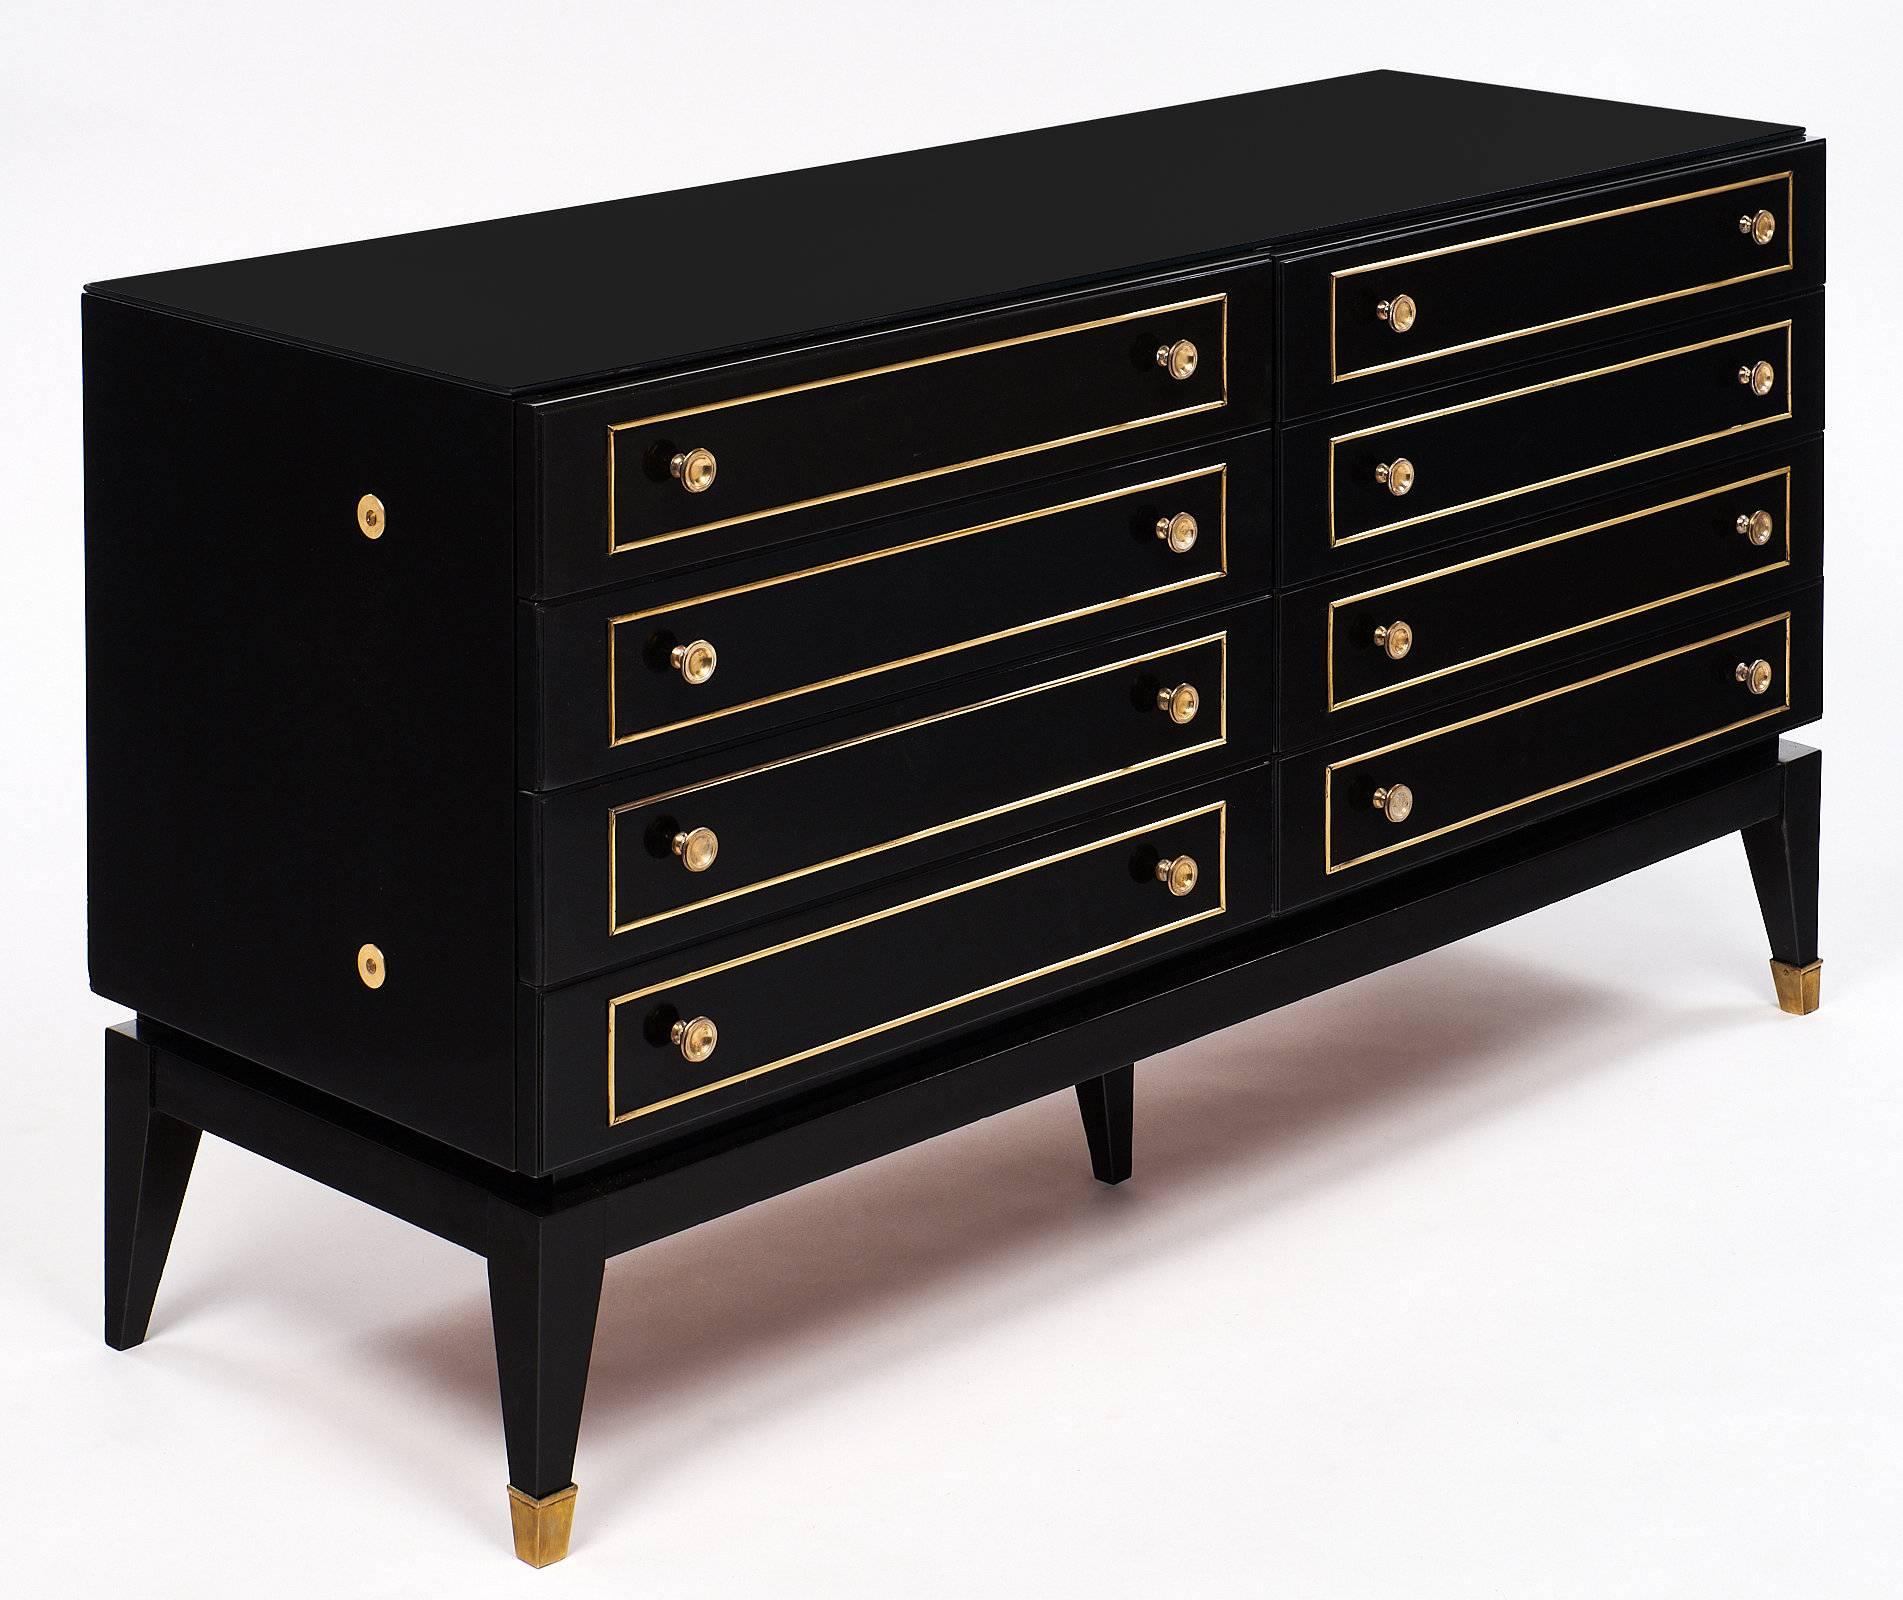 Wonderful chest of drawer made of cherrywood and featuring brass trims throughout, brass knobs, and eight drawers. This piece is ebonized, topped with a black cobalt glass, and finished with a French polish. This is a classy, great piece with